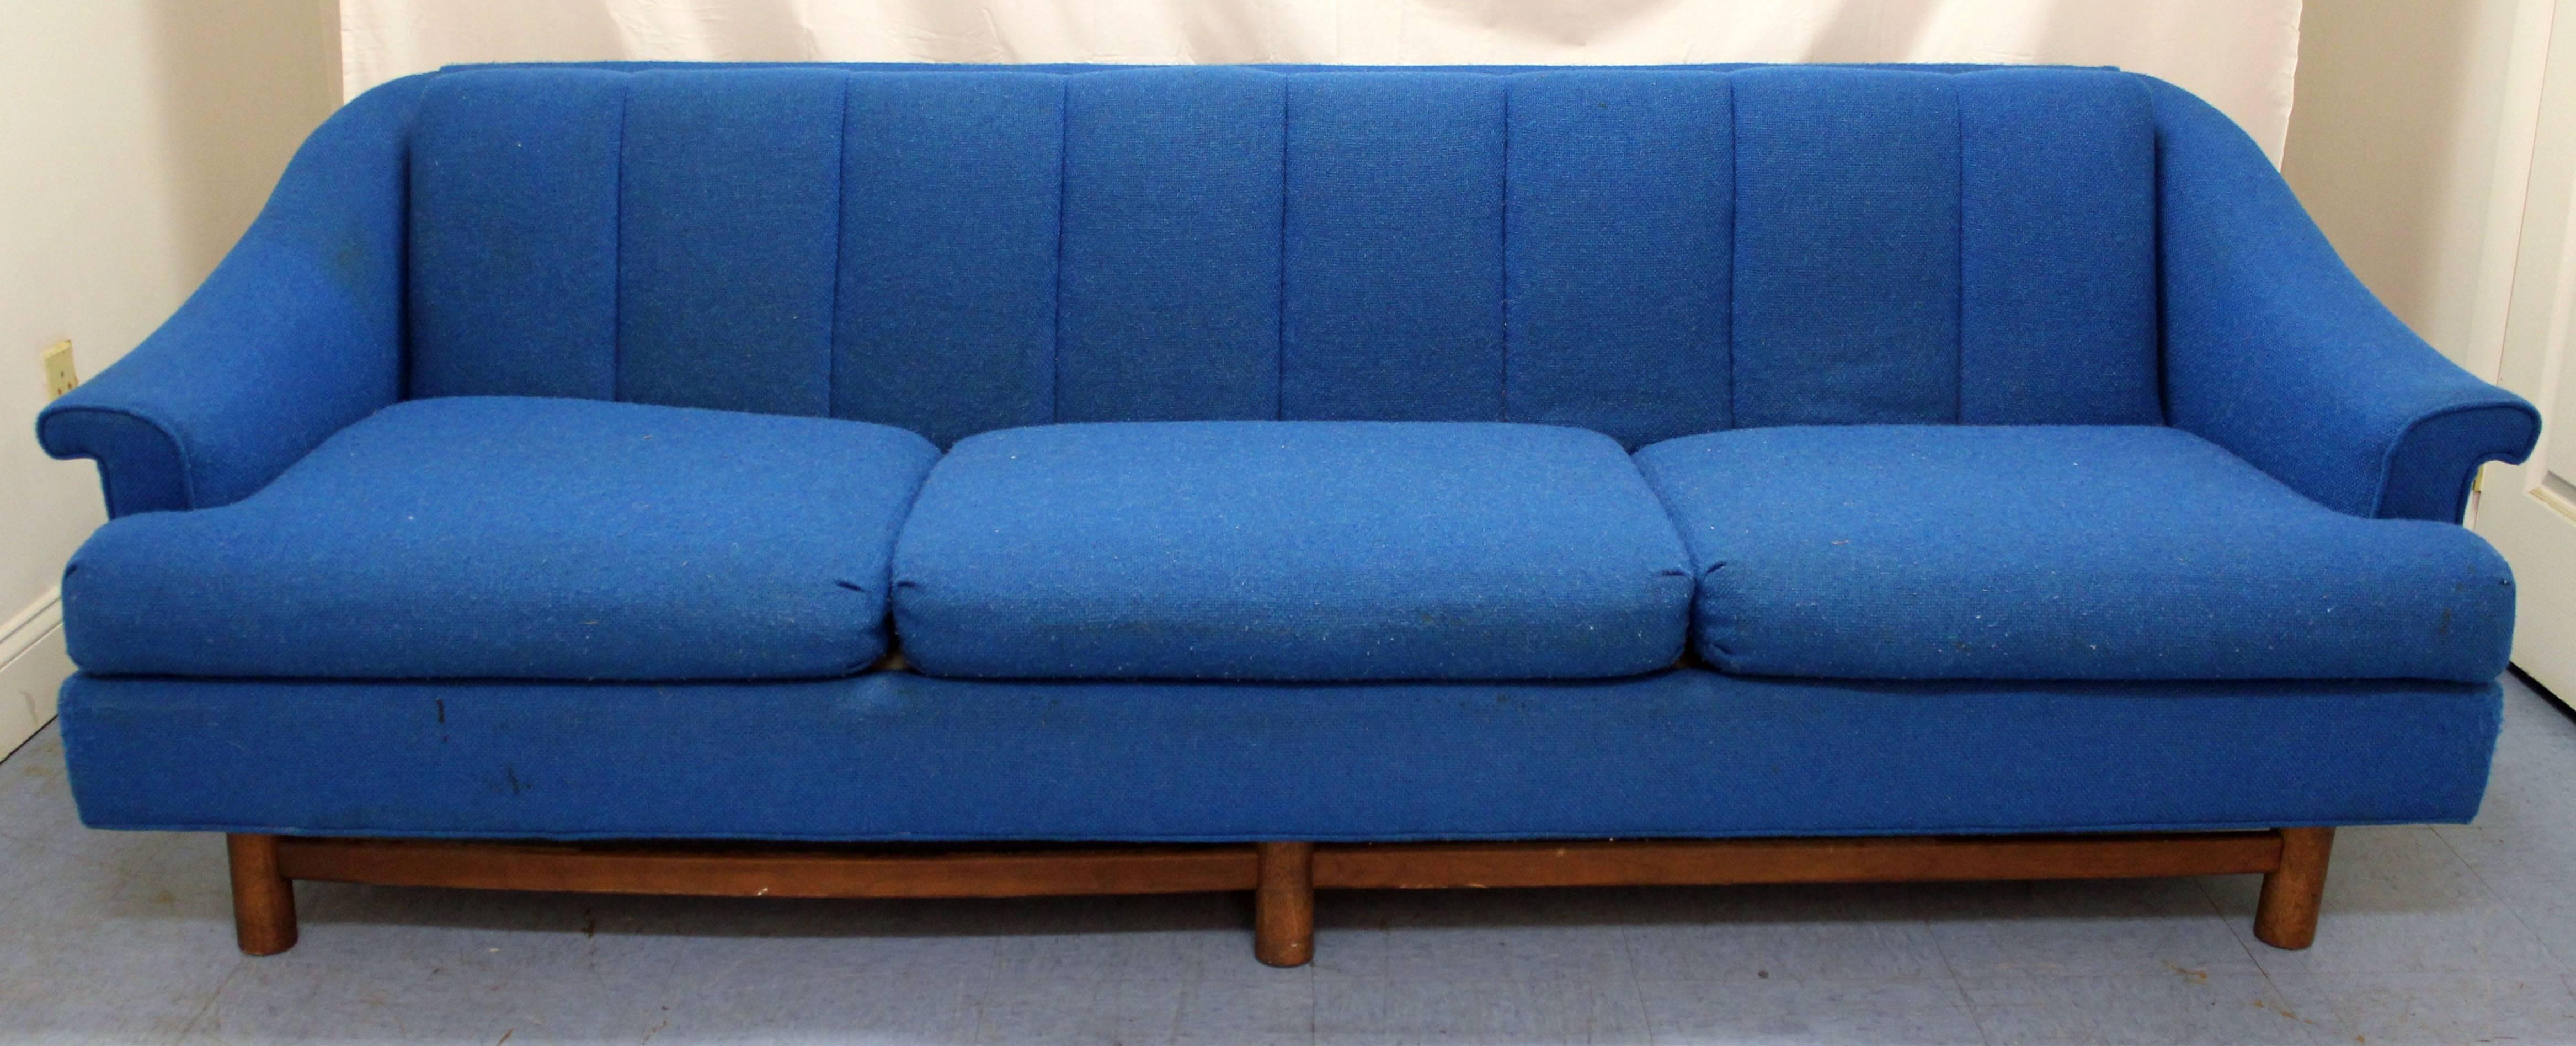 This is a midcentury sofa with blue upholster and wooden legs.